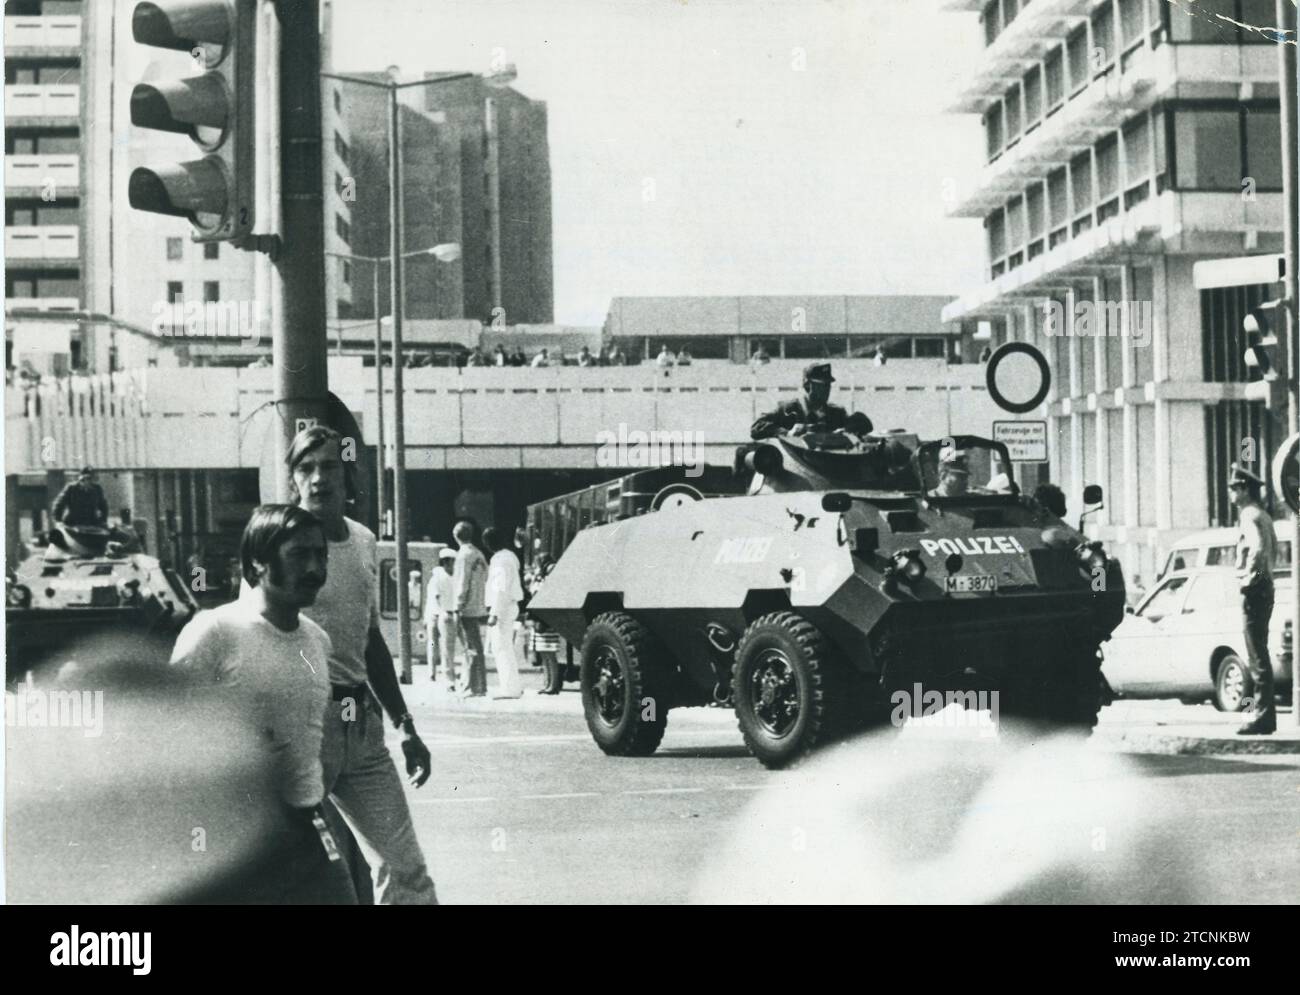 Munich (Germany), 09/05/1972. Attack against the headquarters of the Israeli Olympic team during the celebration of the 1972 Munich Olympics. In the image, a German Police armored vehicle patrols through the Olympic village after the attack by the terrorist organization 'Black September'. Credit: Album / Archivo ABC Stock Photo